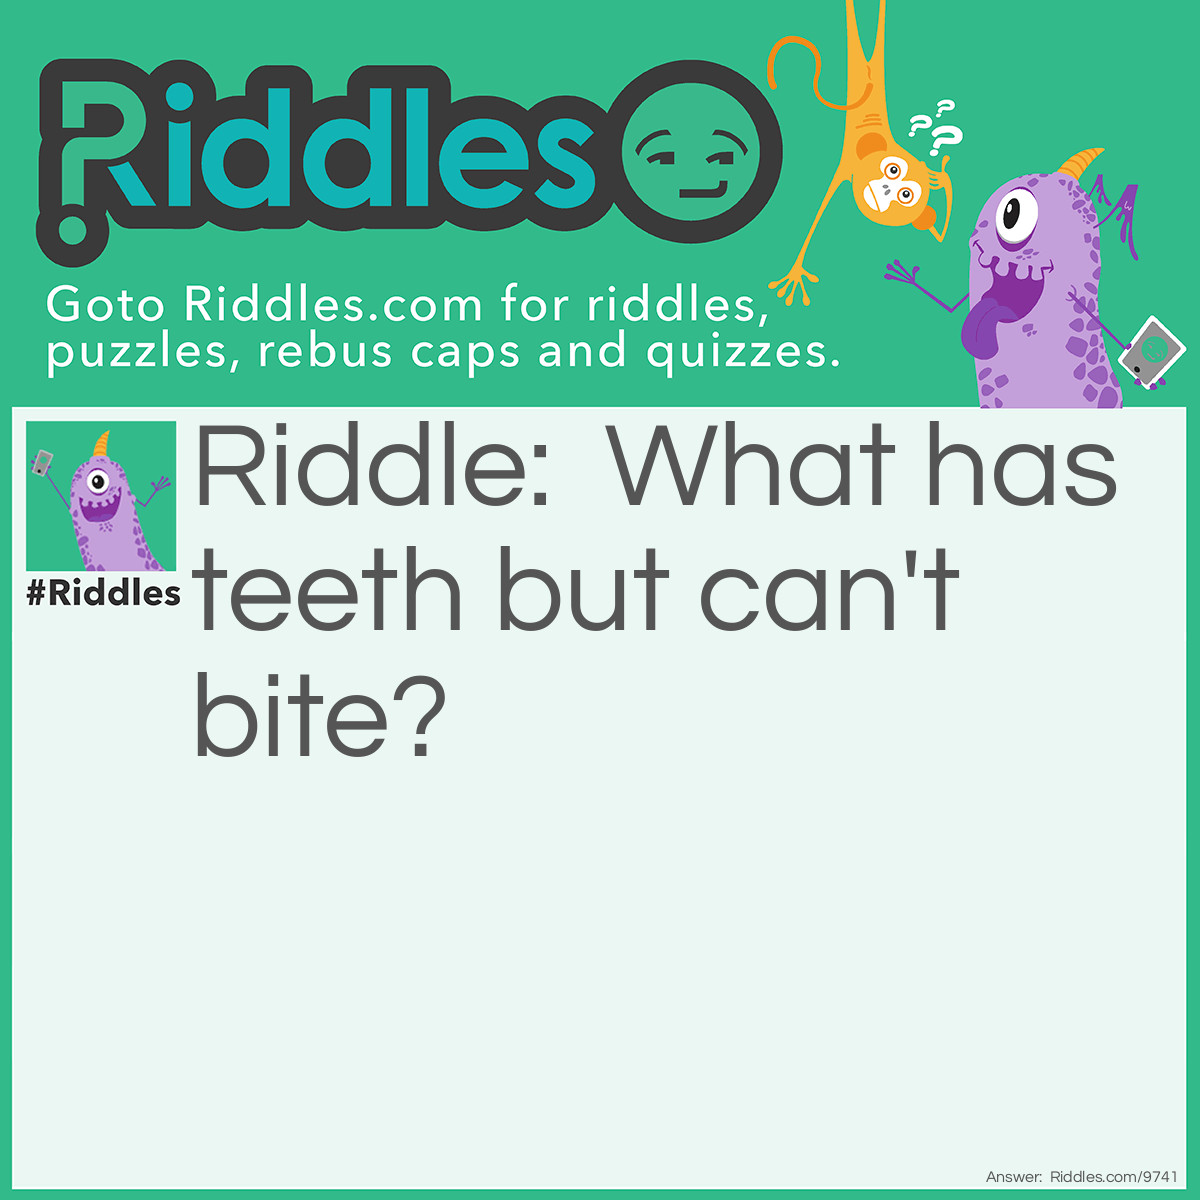 Riddle: What has teeth but can't bite? Answer: A comb.